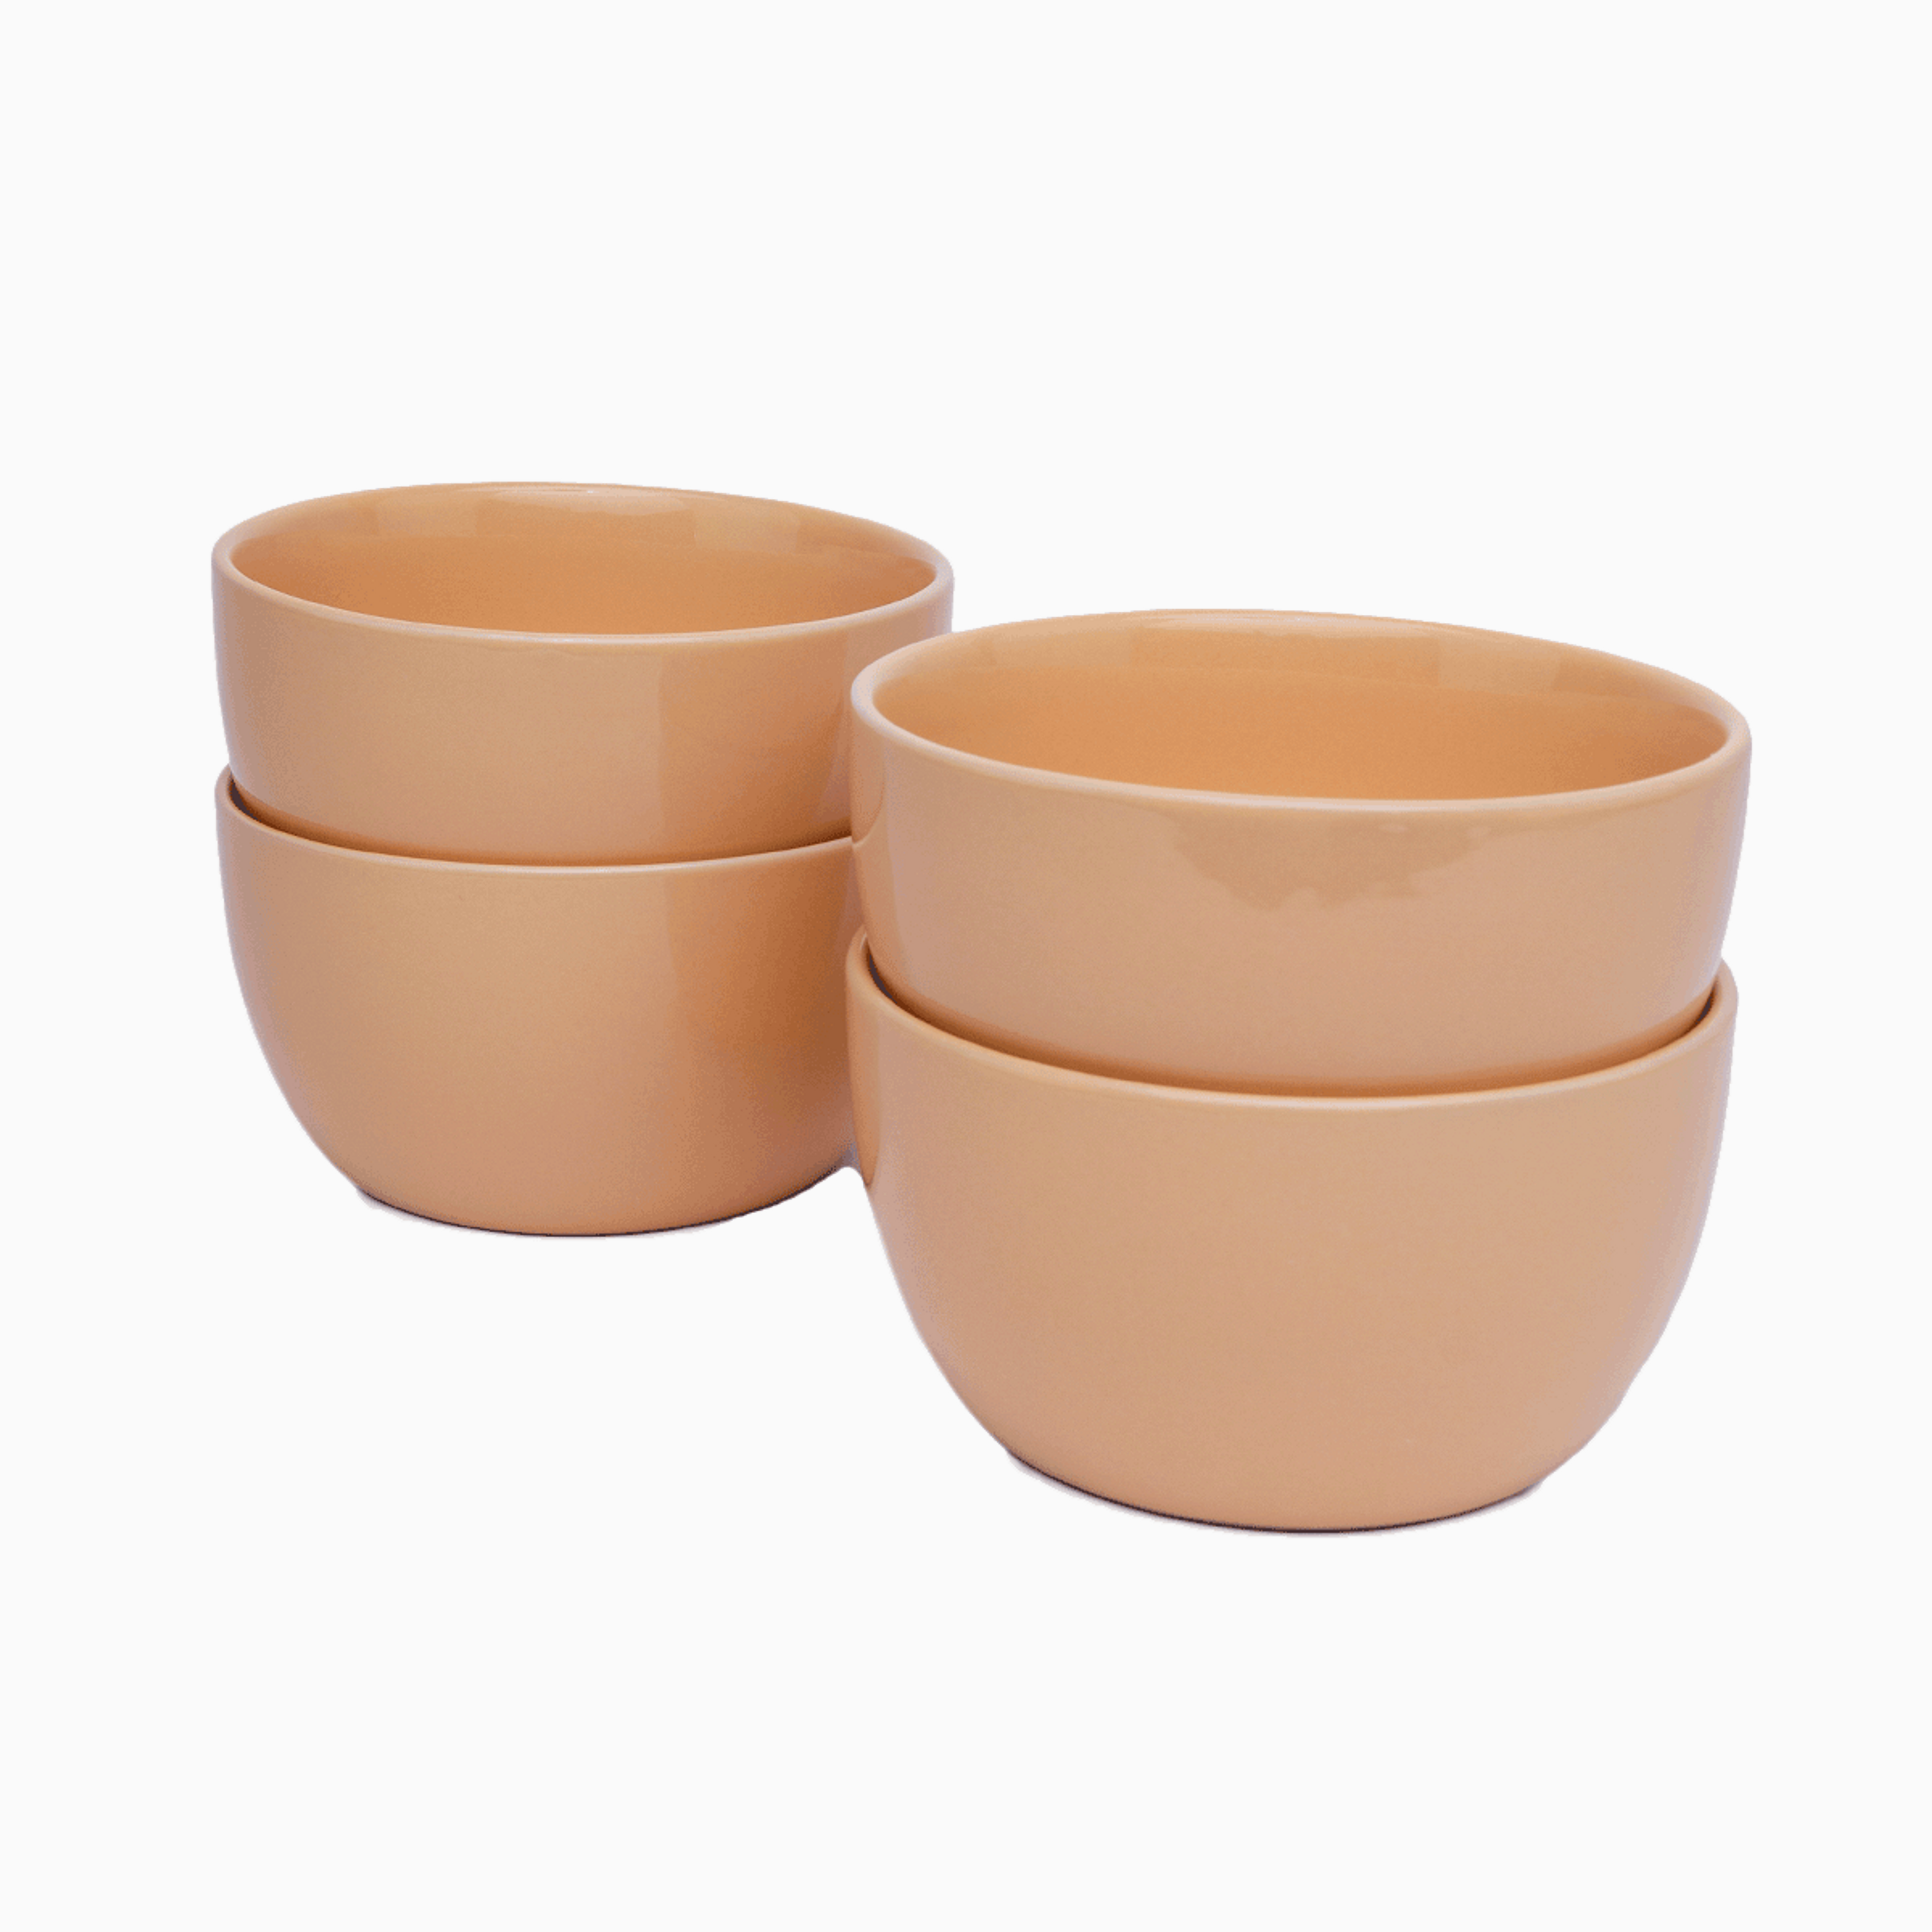 Tierra Bowl Set in Peach by Jungalow